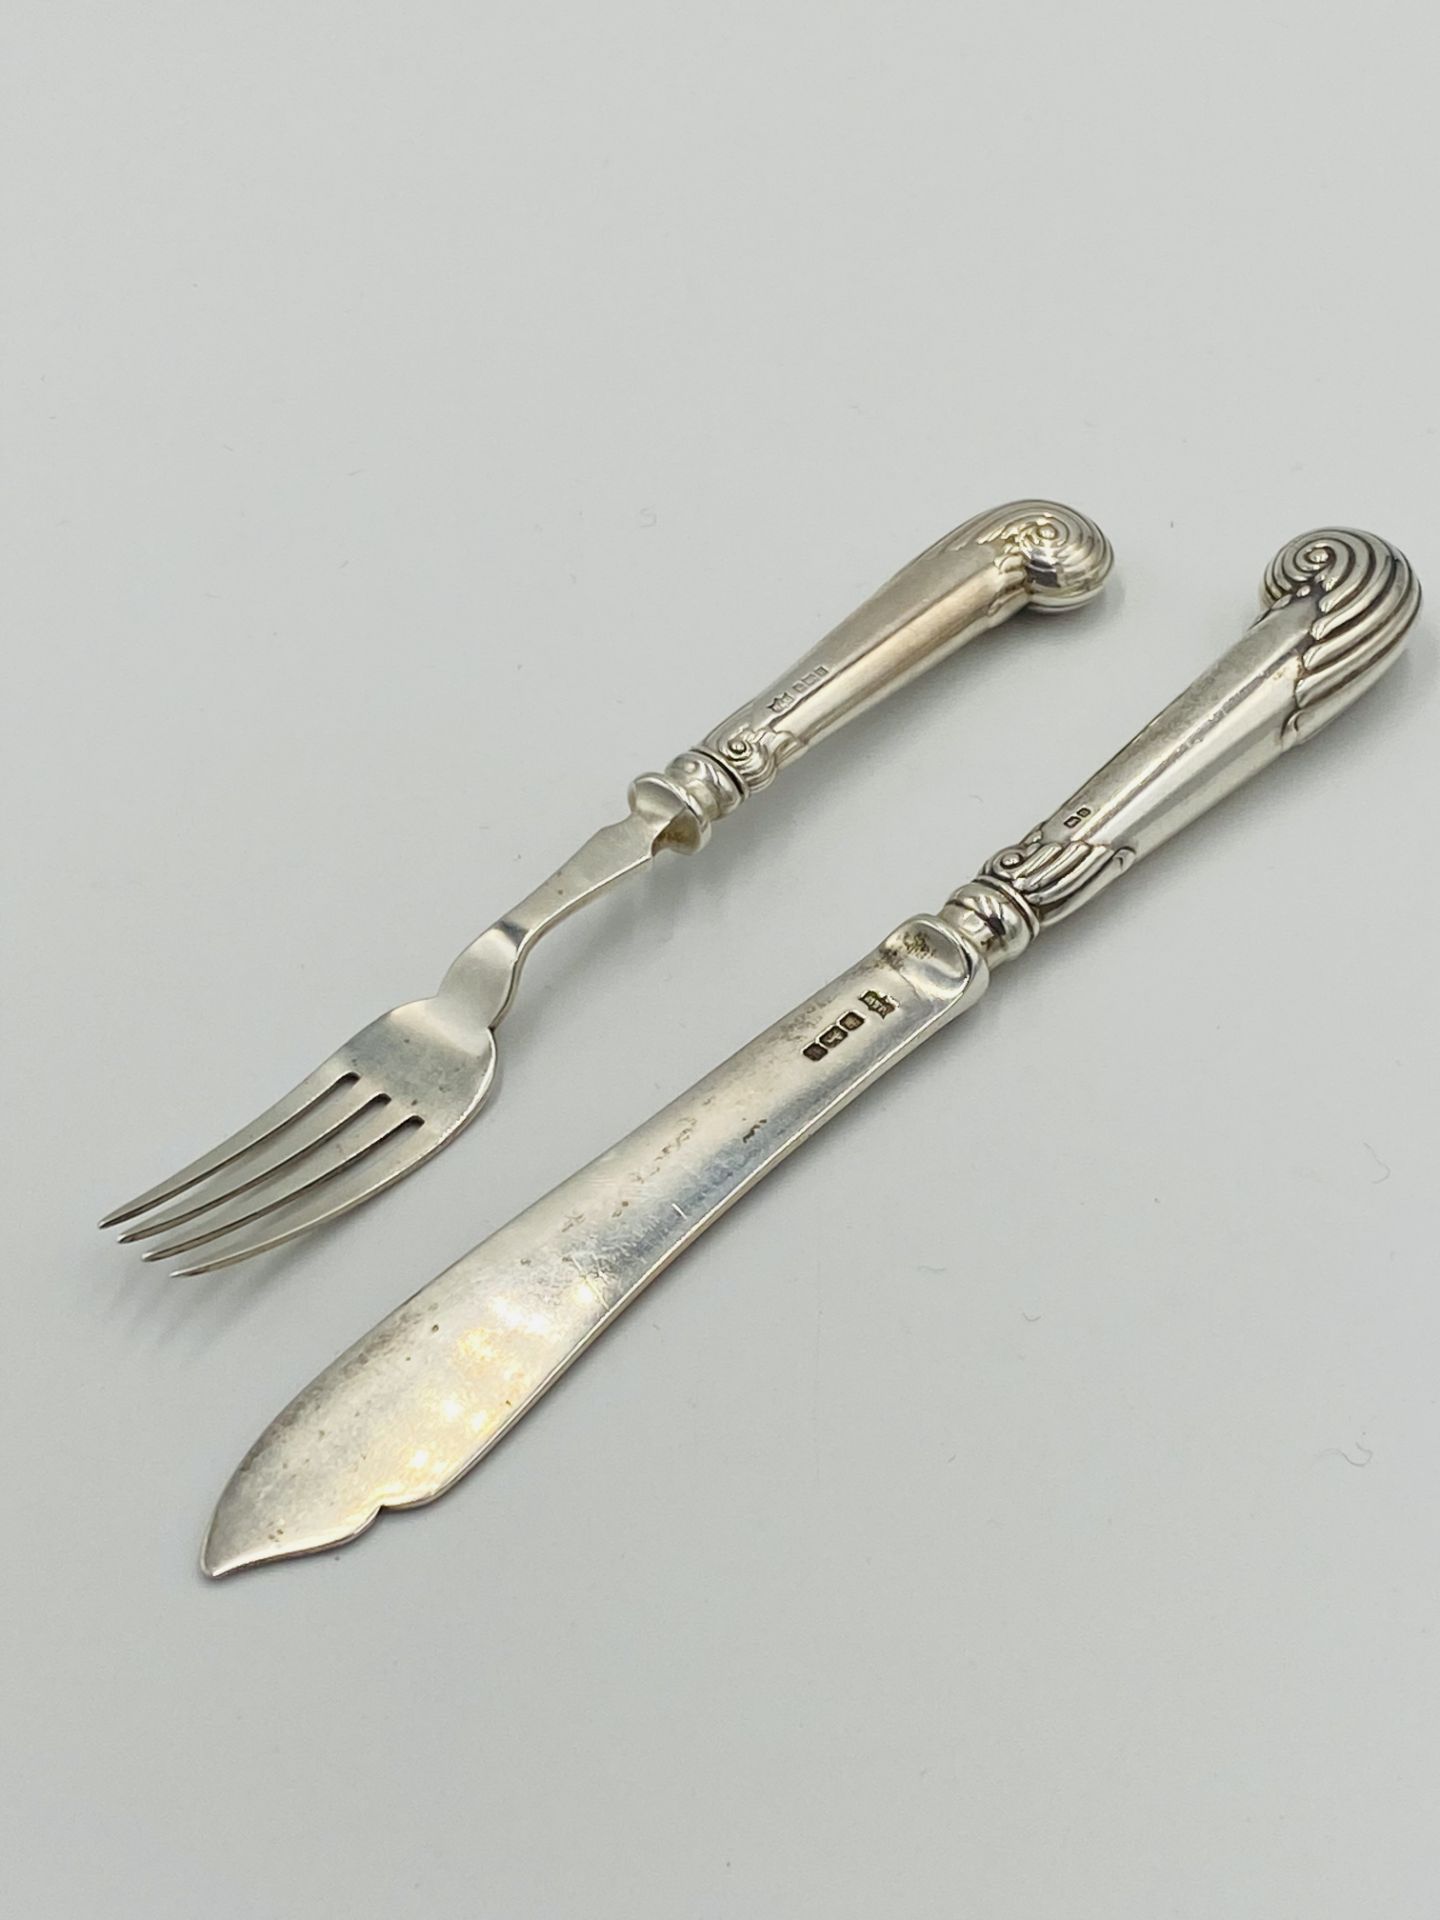 Twelve place set of silver pistol grip fish knives and forks, London 1905 - Image 6 of 11